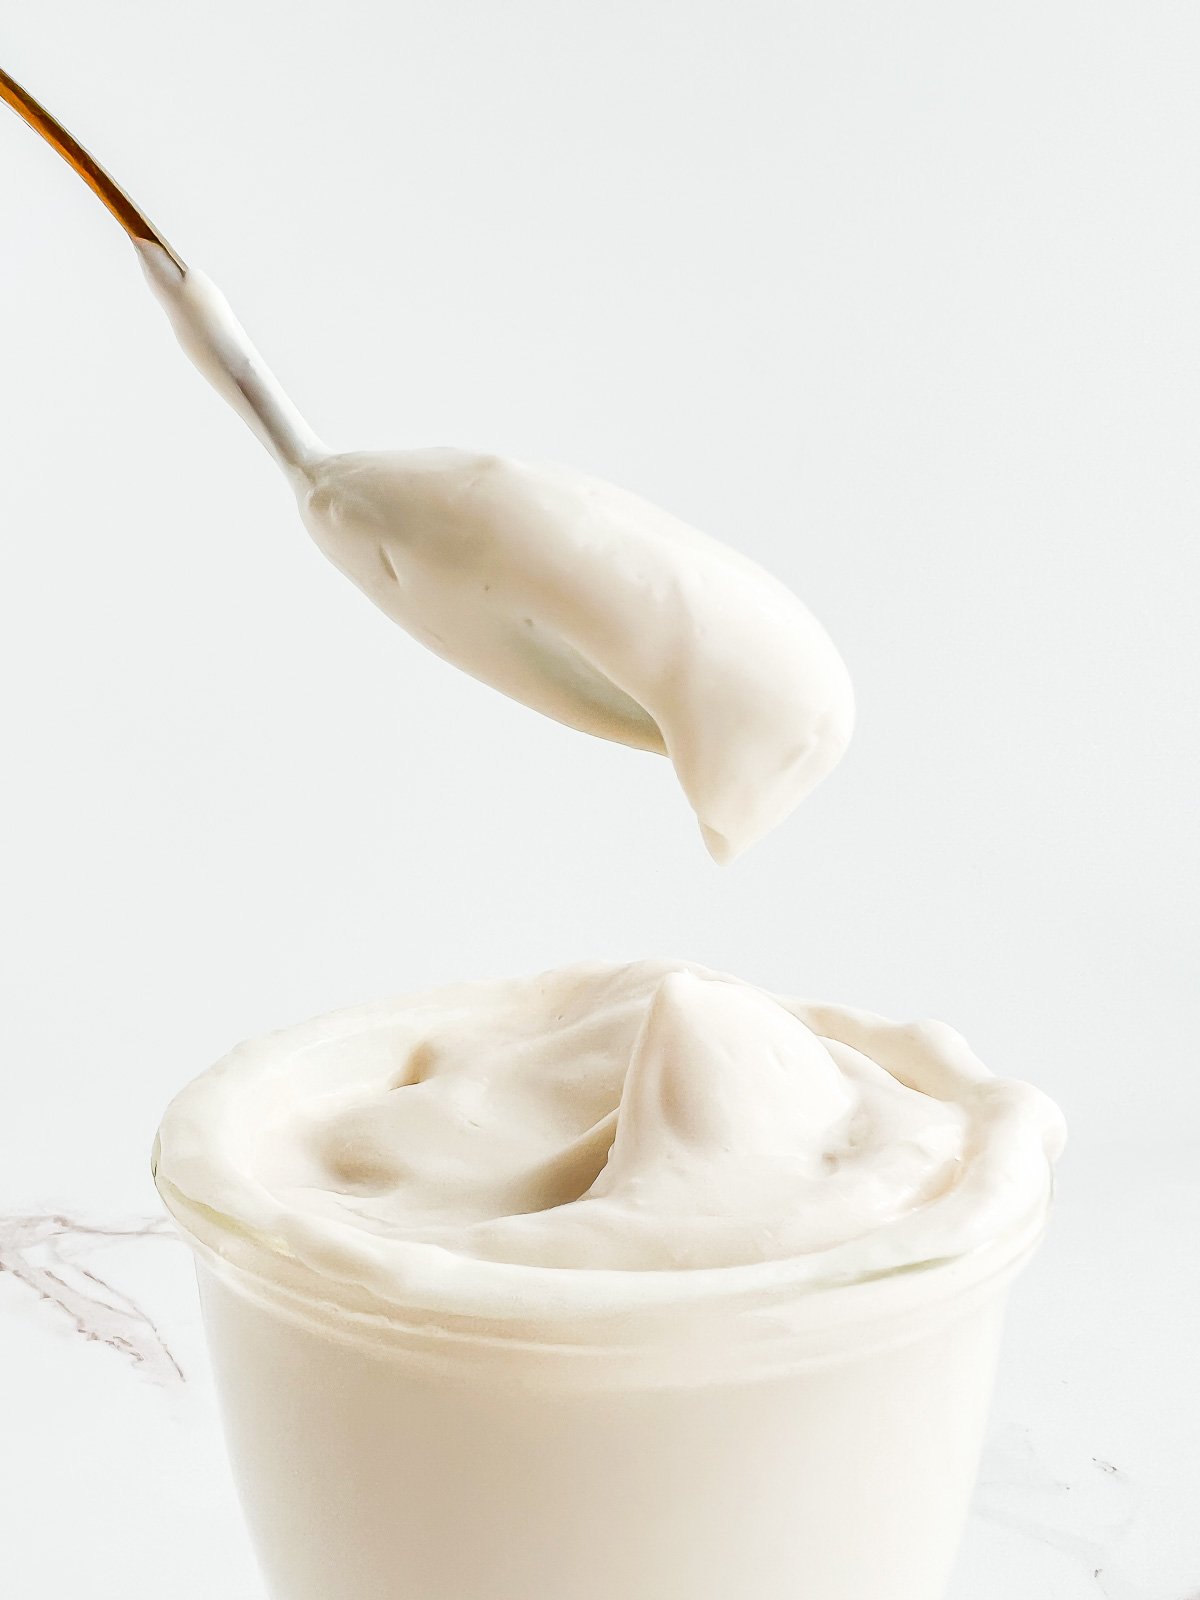 spoonful of vegan sour cream being taken from a glass jar